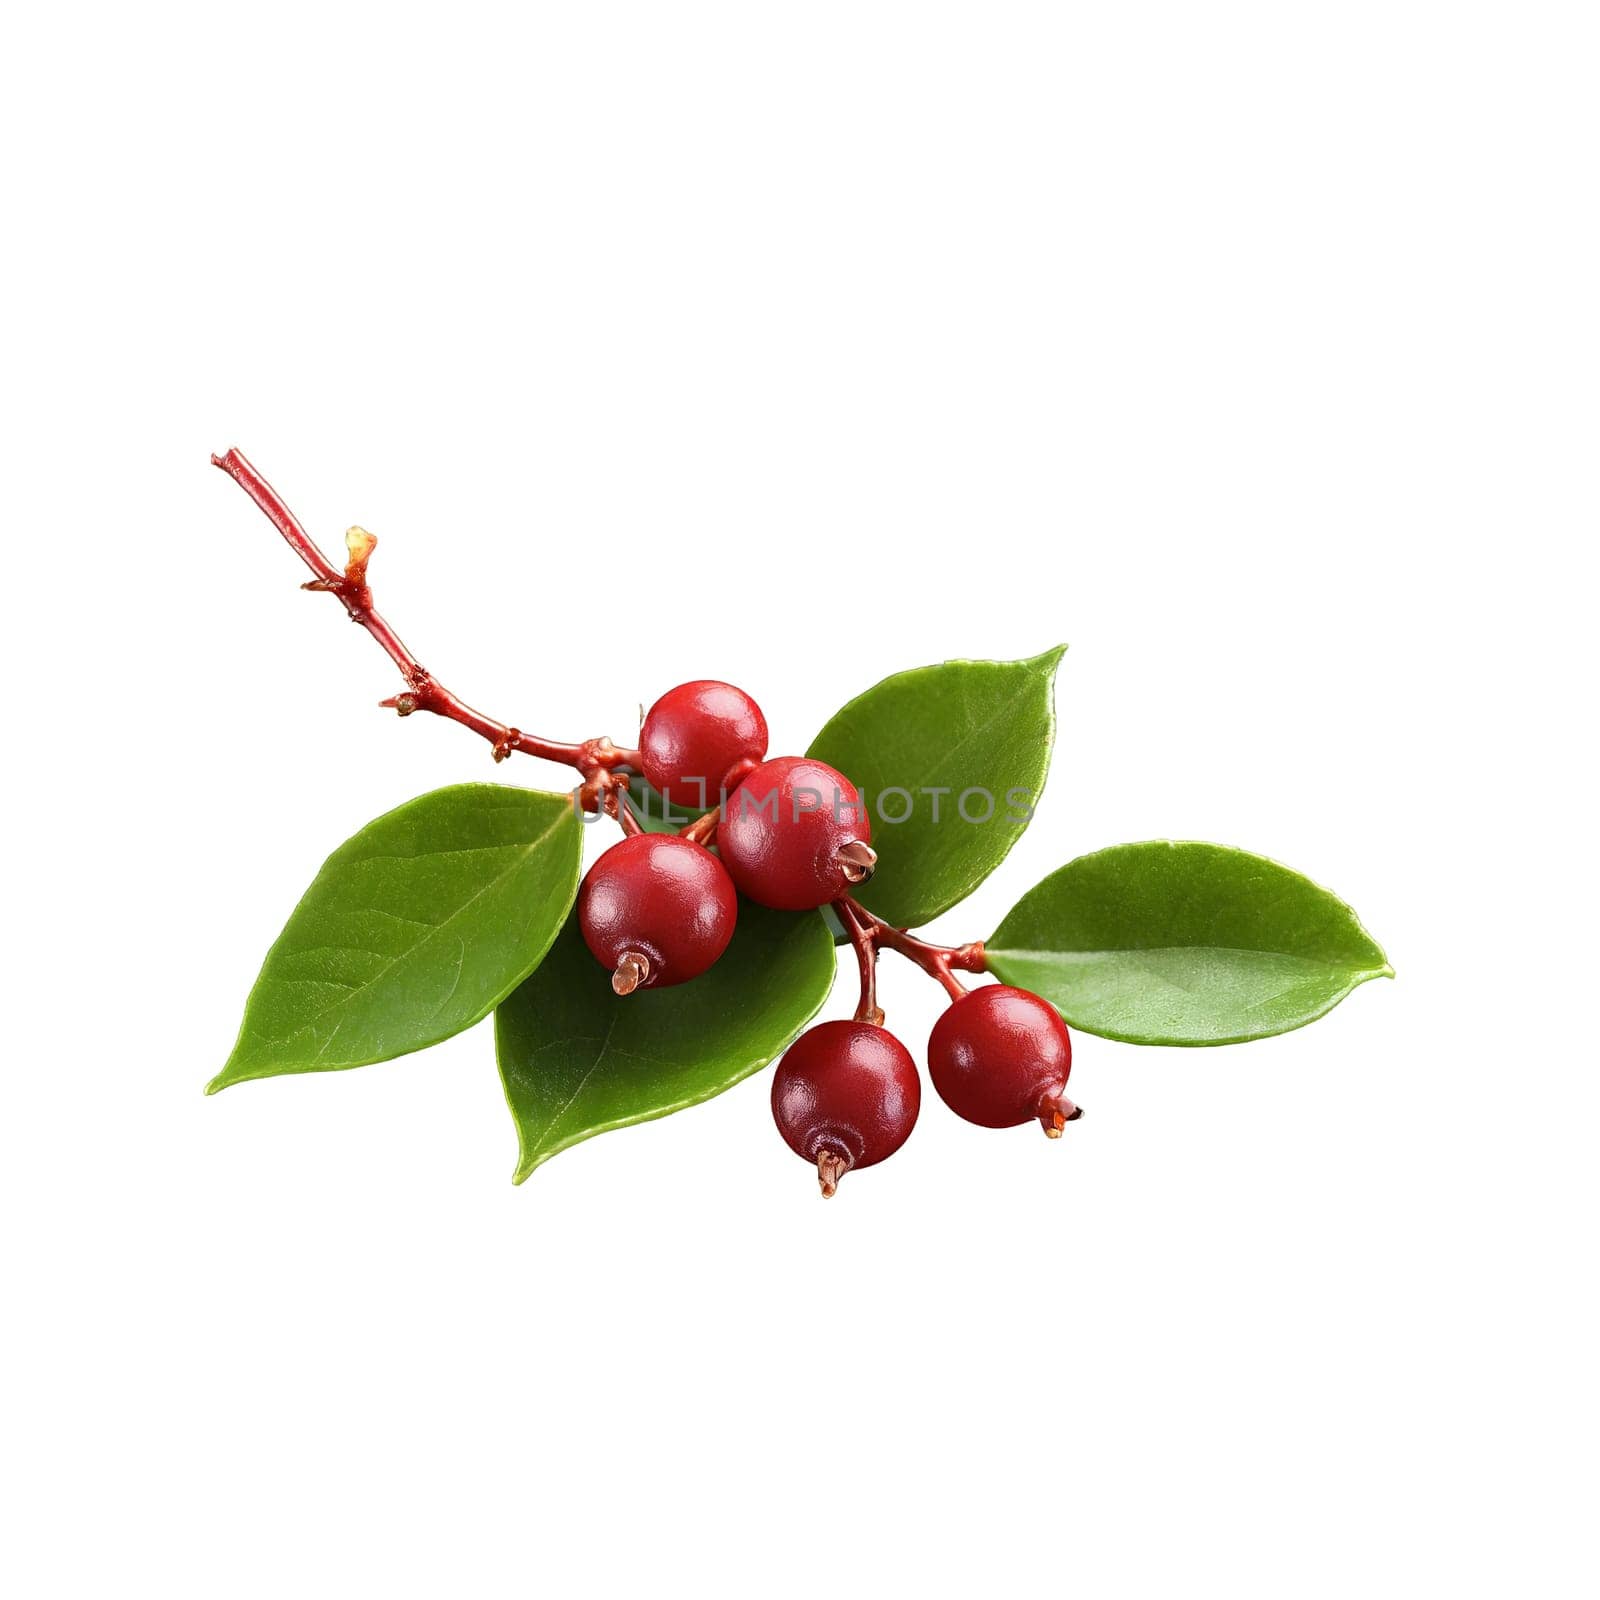 Juicy salal berries cascading glossy leaves spinning juice splattering Gaultheria shallon Food and Culinary concept. Food isolated on transparent background.